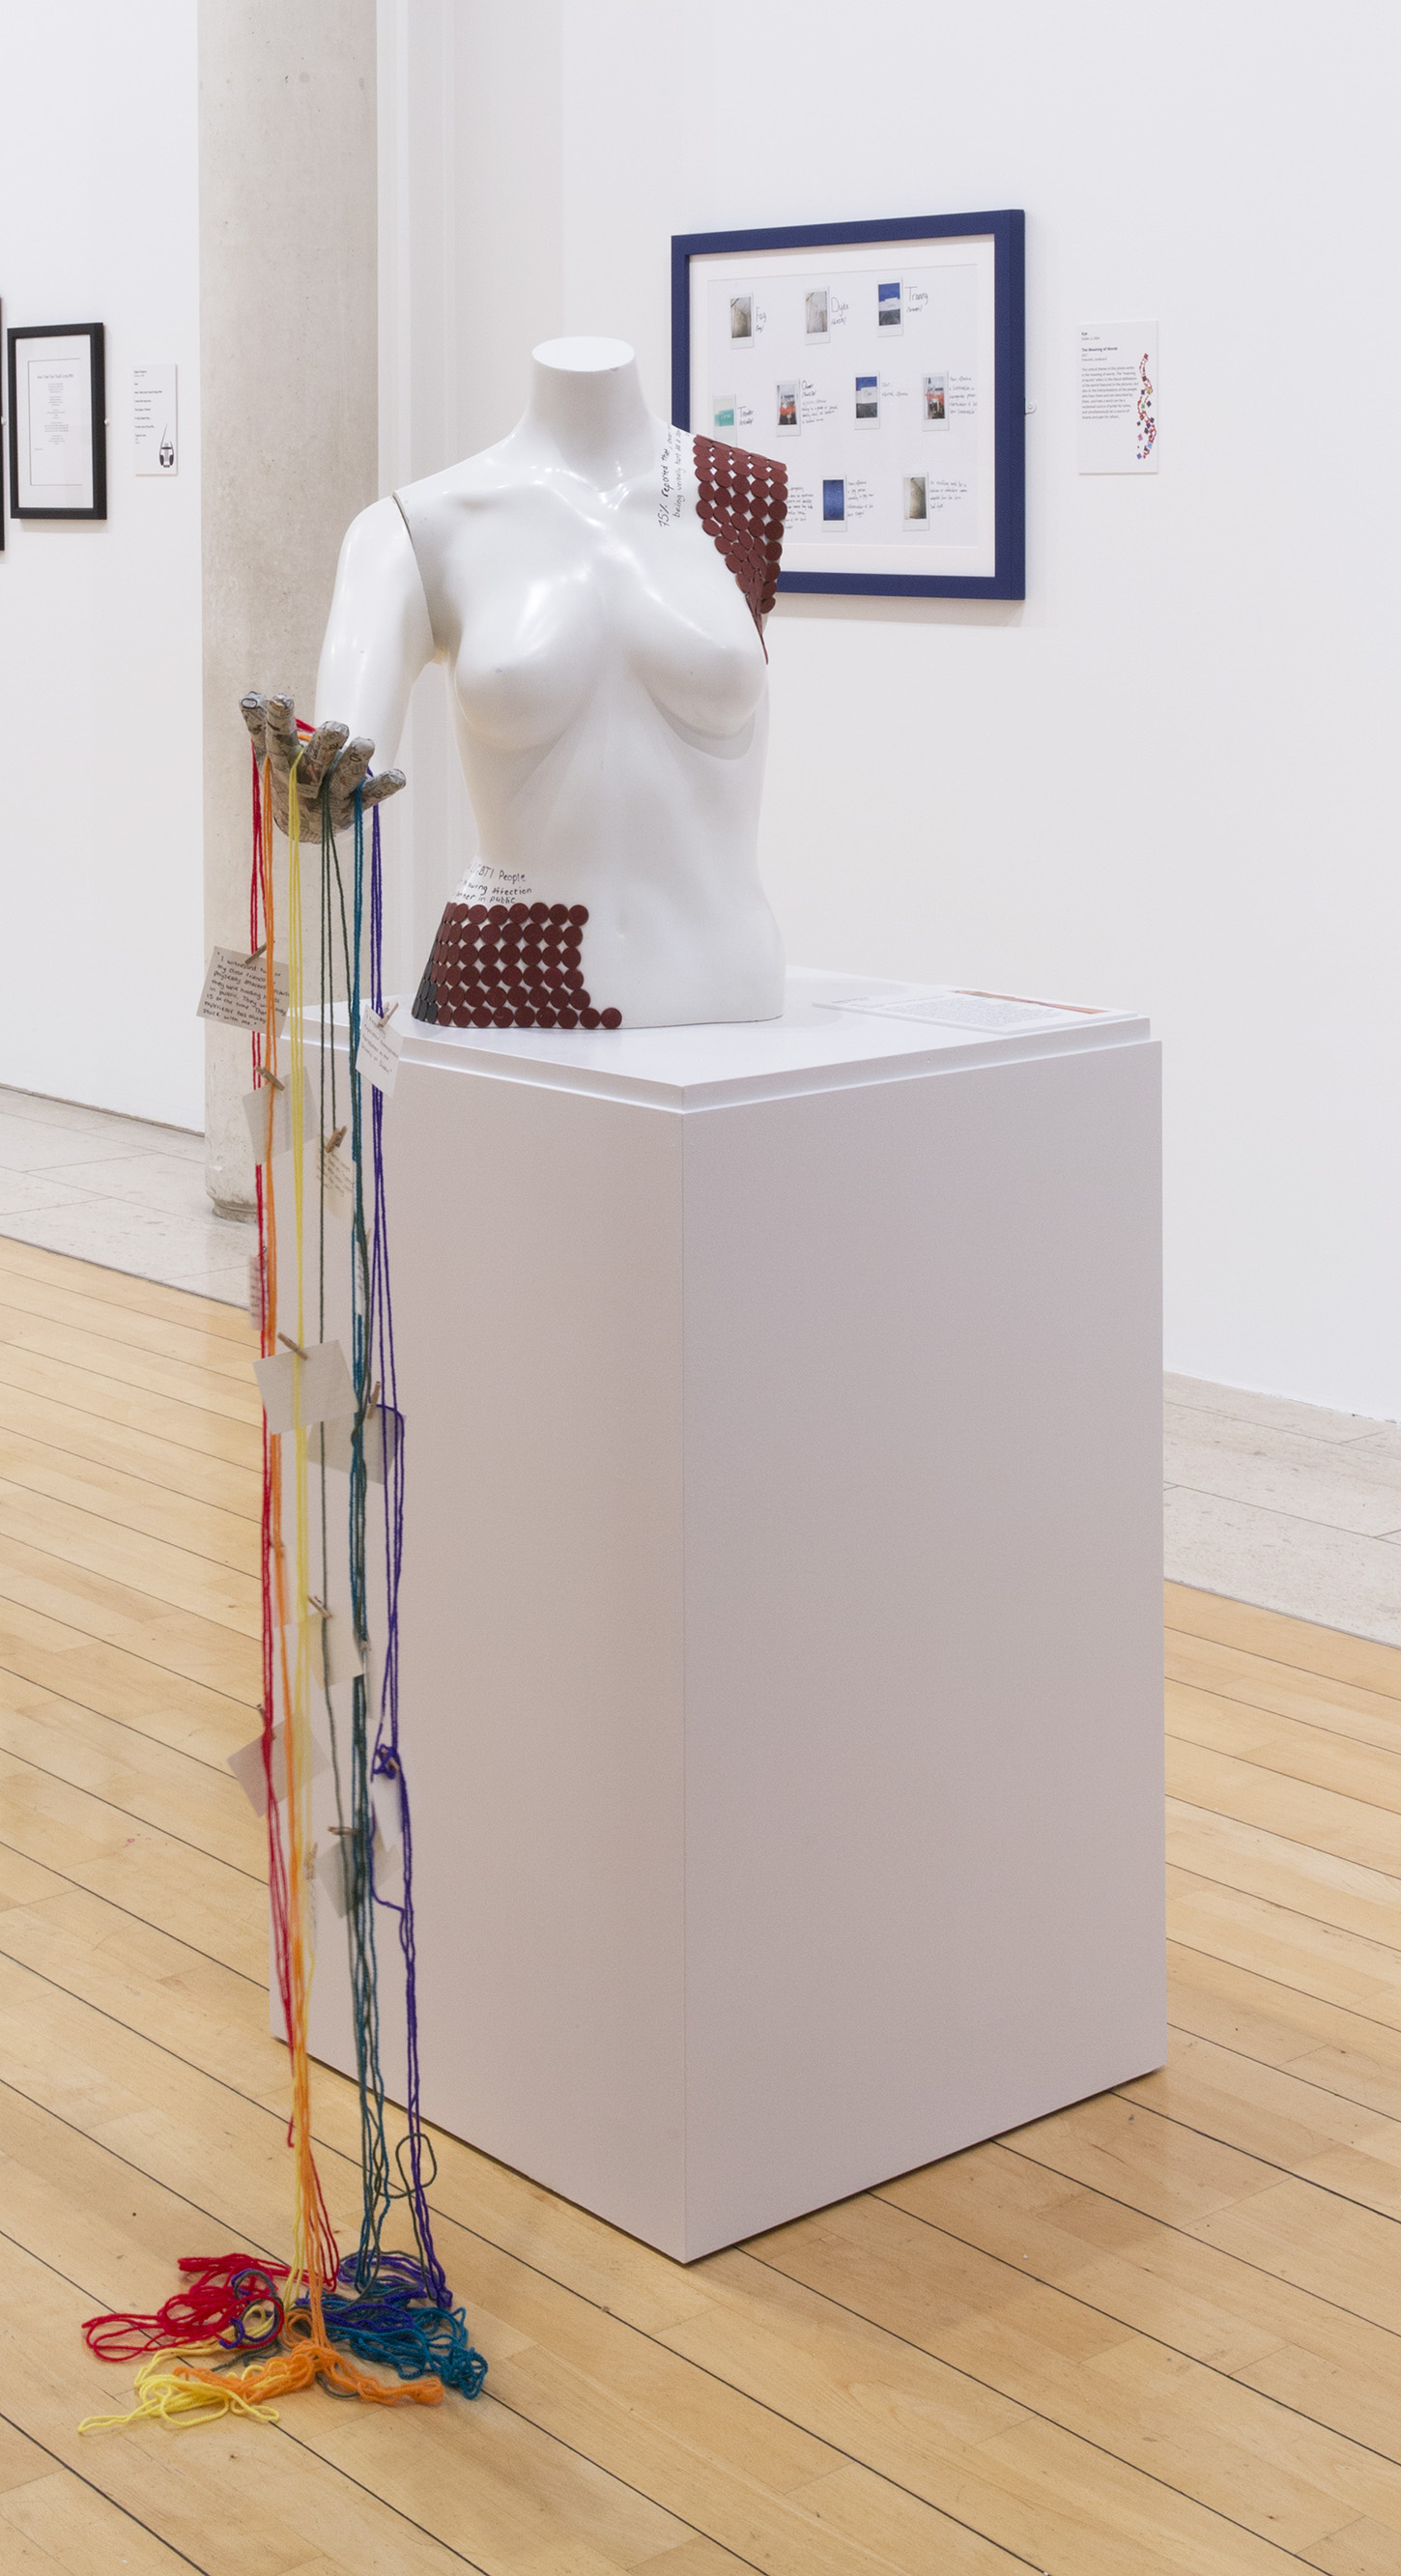 Installation shot of white bust on a white plinth with rainbow coloured strings trailing from the bust's hand to the floor